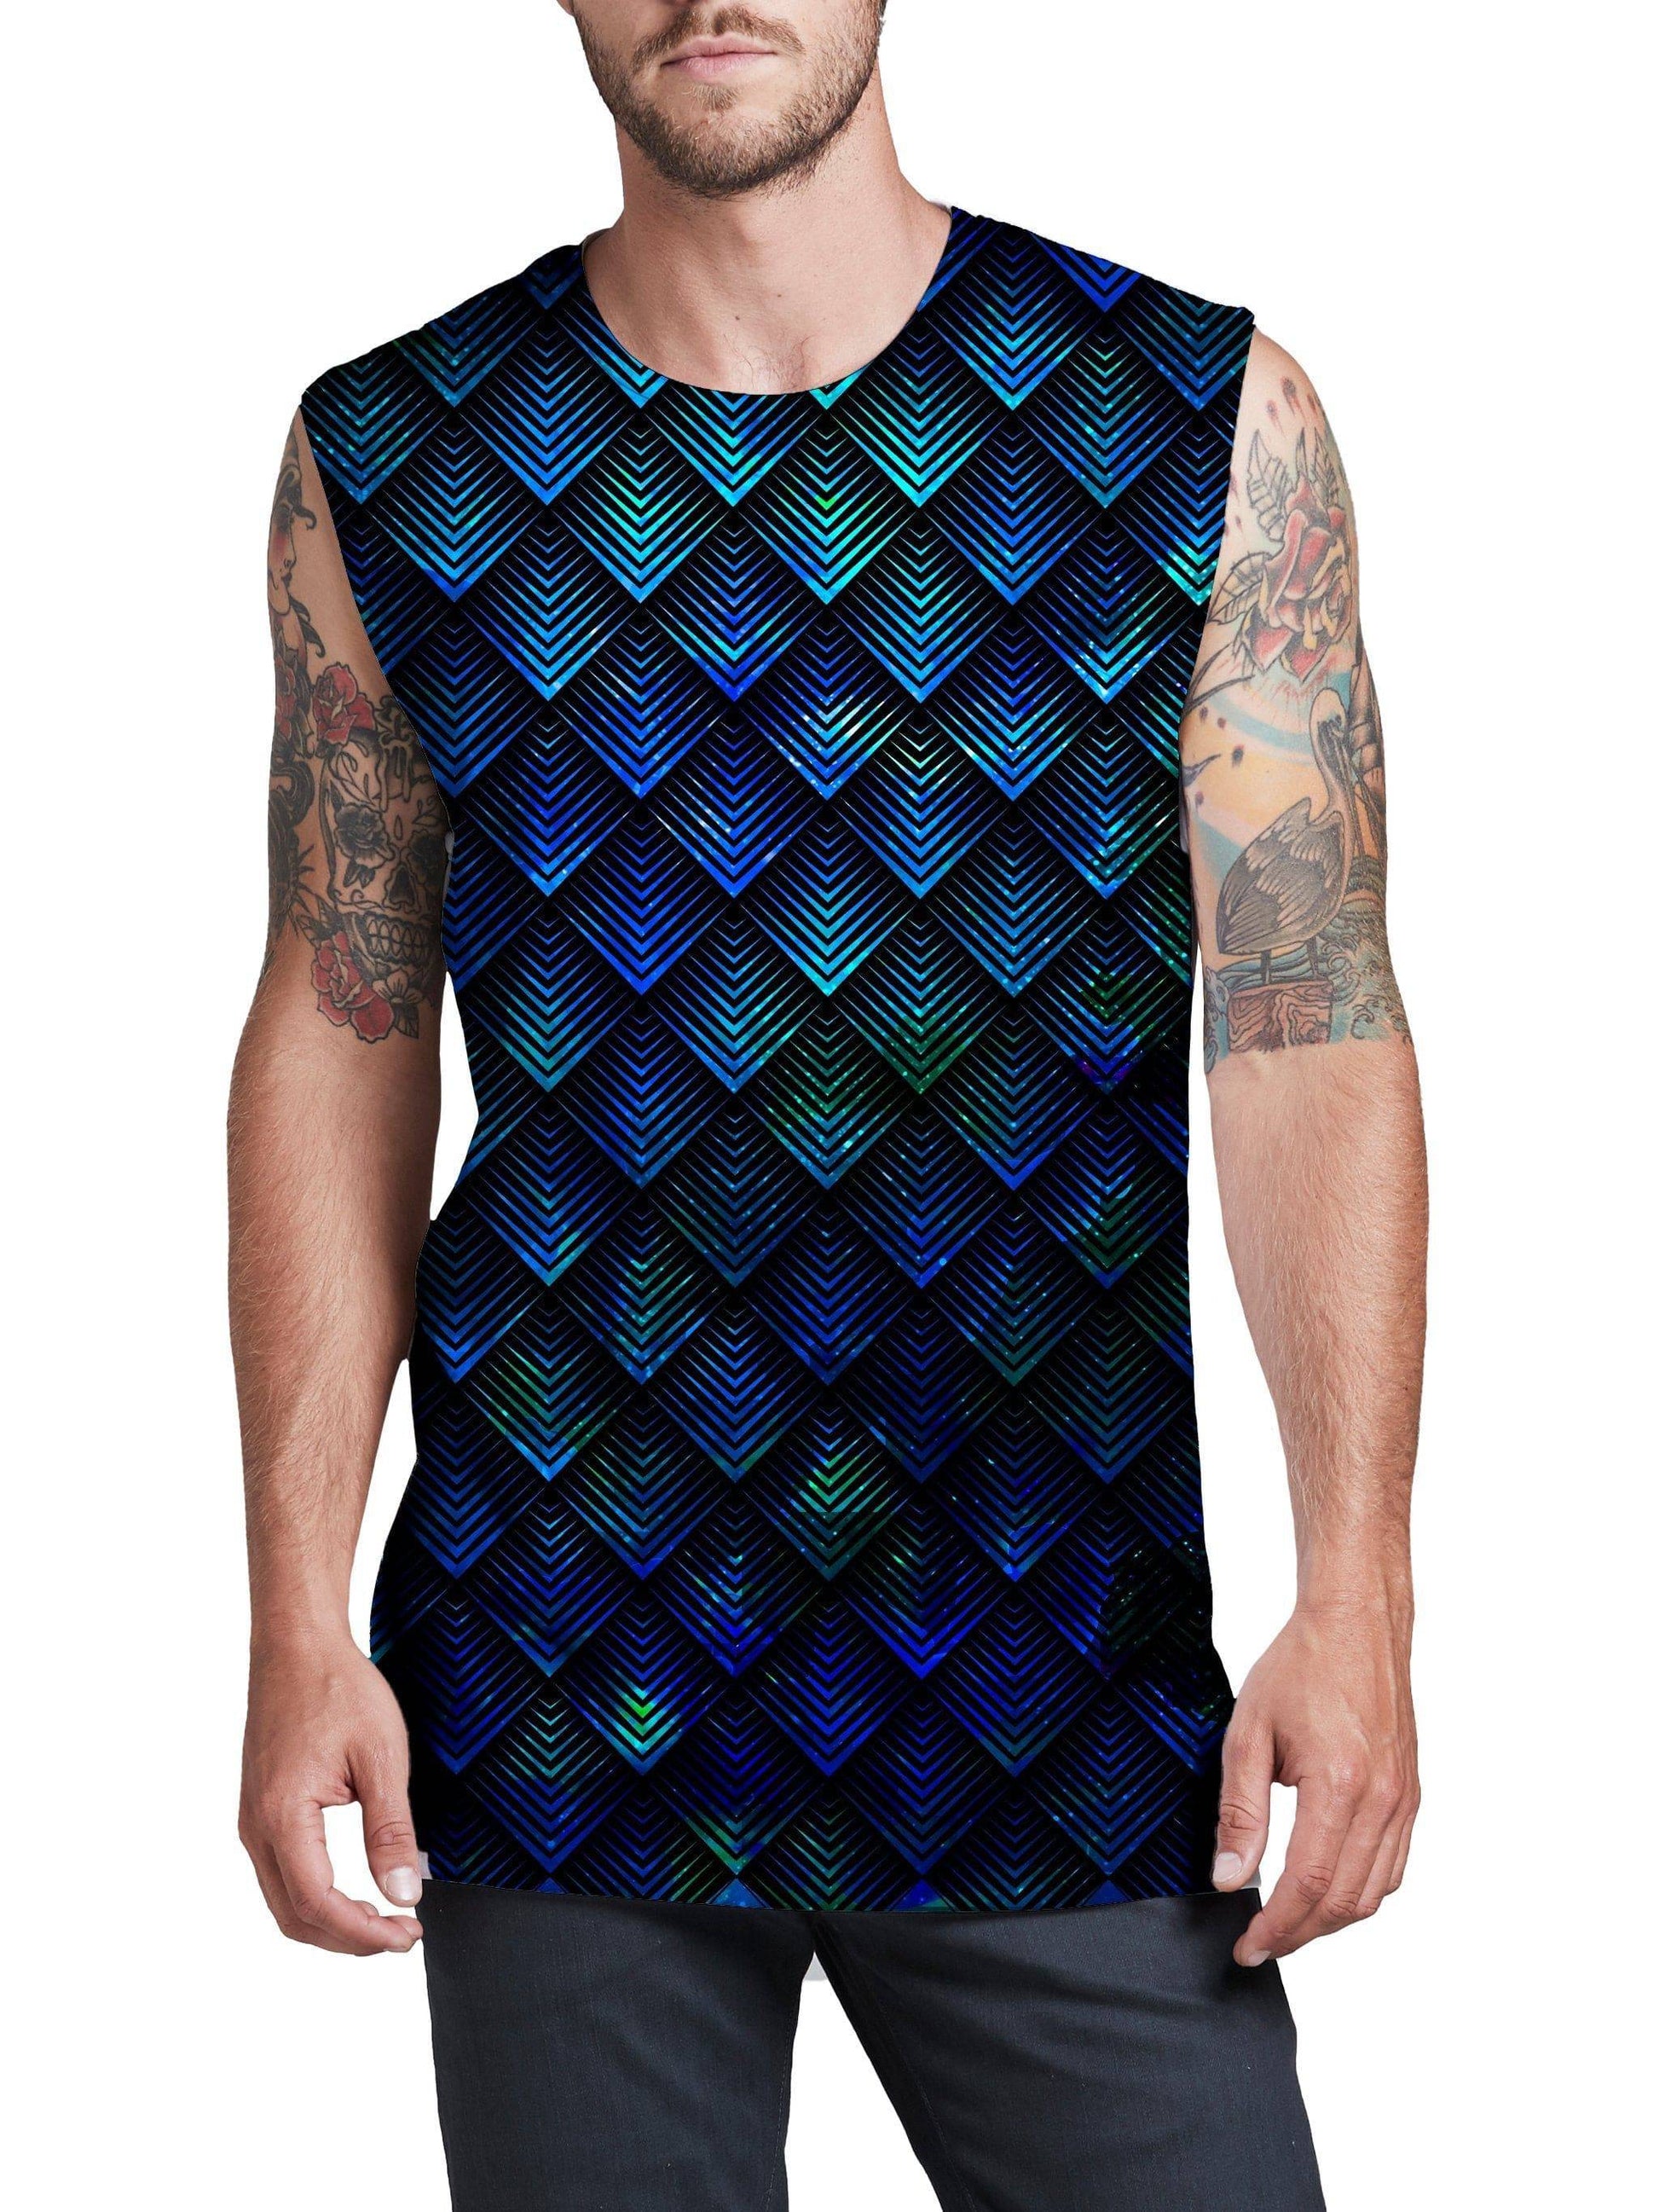 Galactic Dragon Scale Teal Men's Muscle Tank, Noctum X Truth, | iEDM